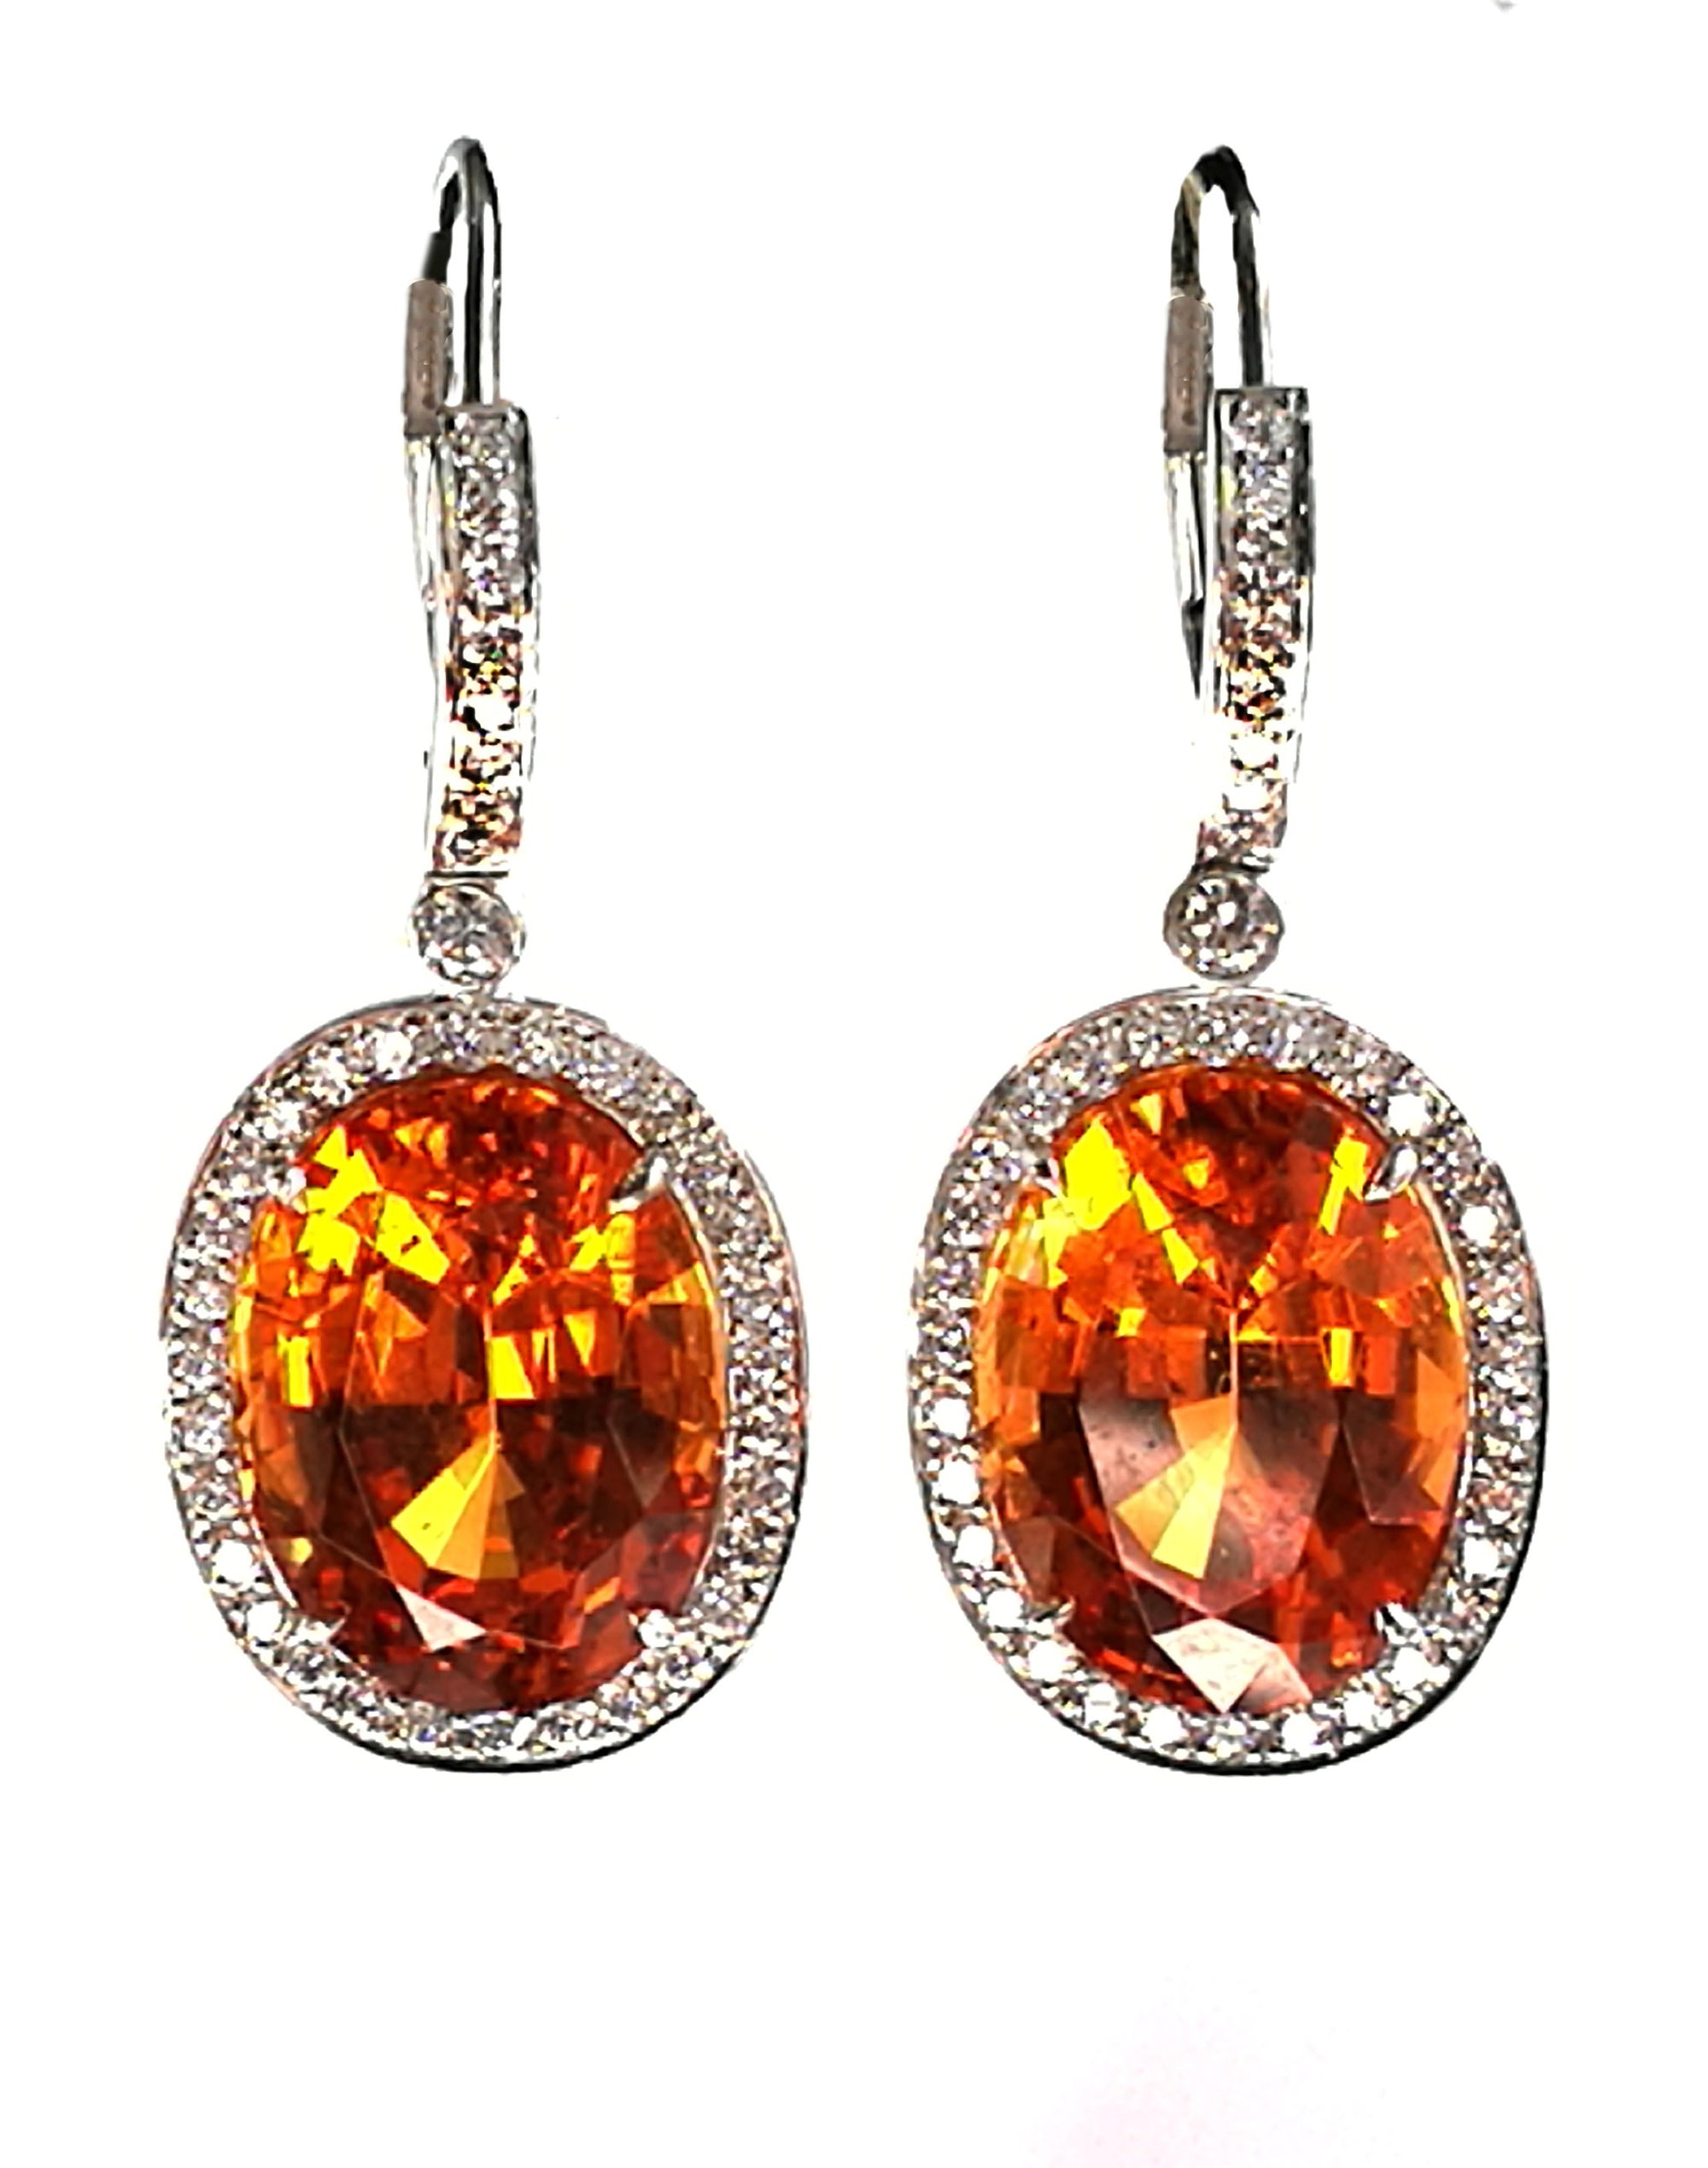 Tiffany & Co. 'Colours Collection' 16.14ct Spessartite Garnet & Diamond Earrings in Platinum